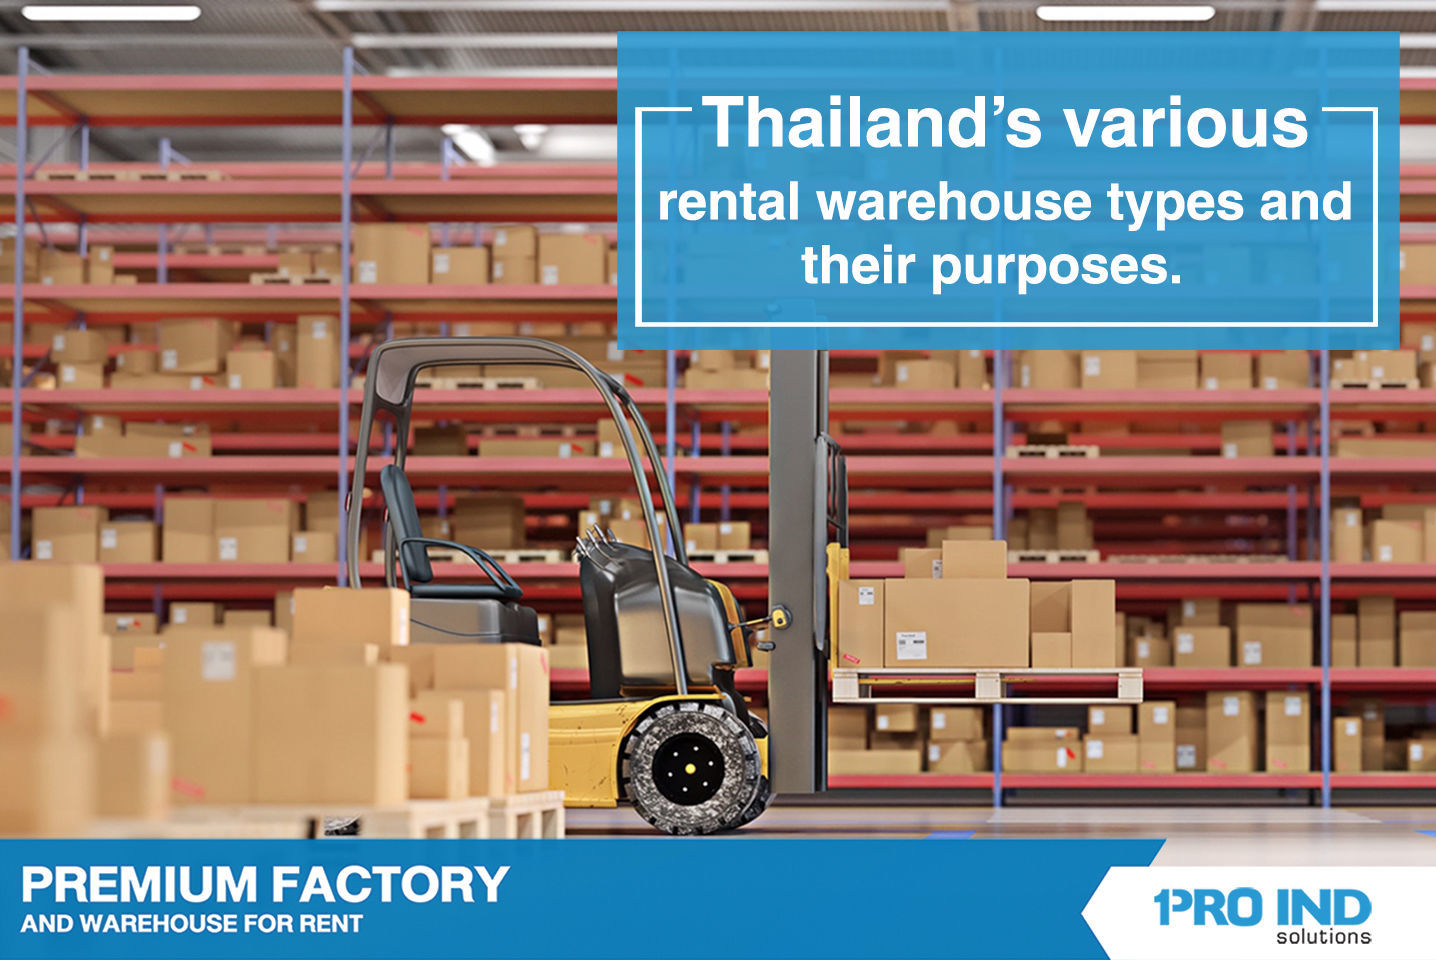 we would examine the various types of rental warehouses offered in the Thai property market and how they can fit your business operations. 

